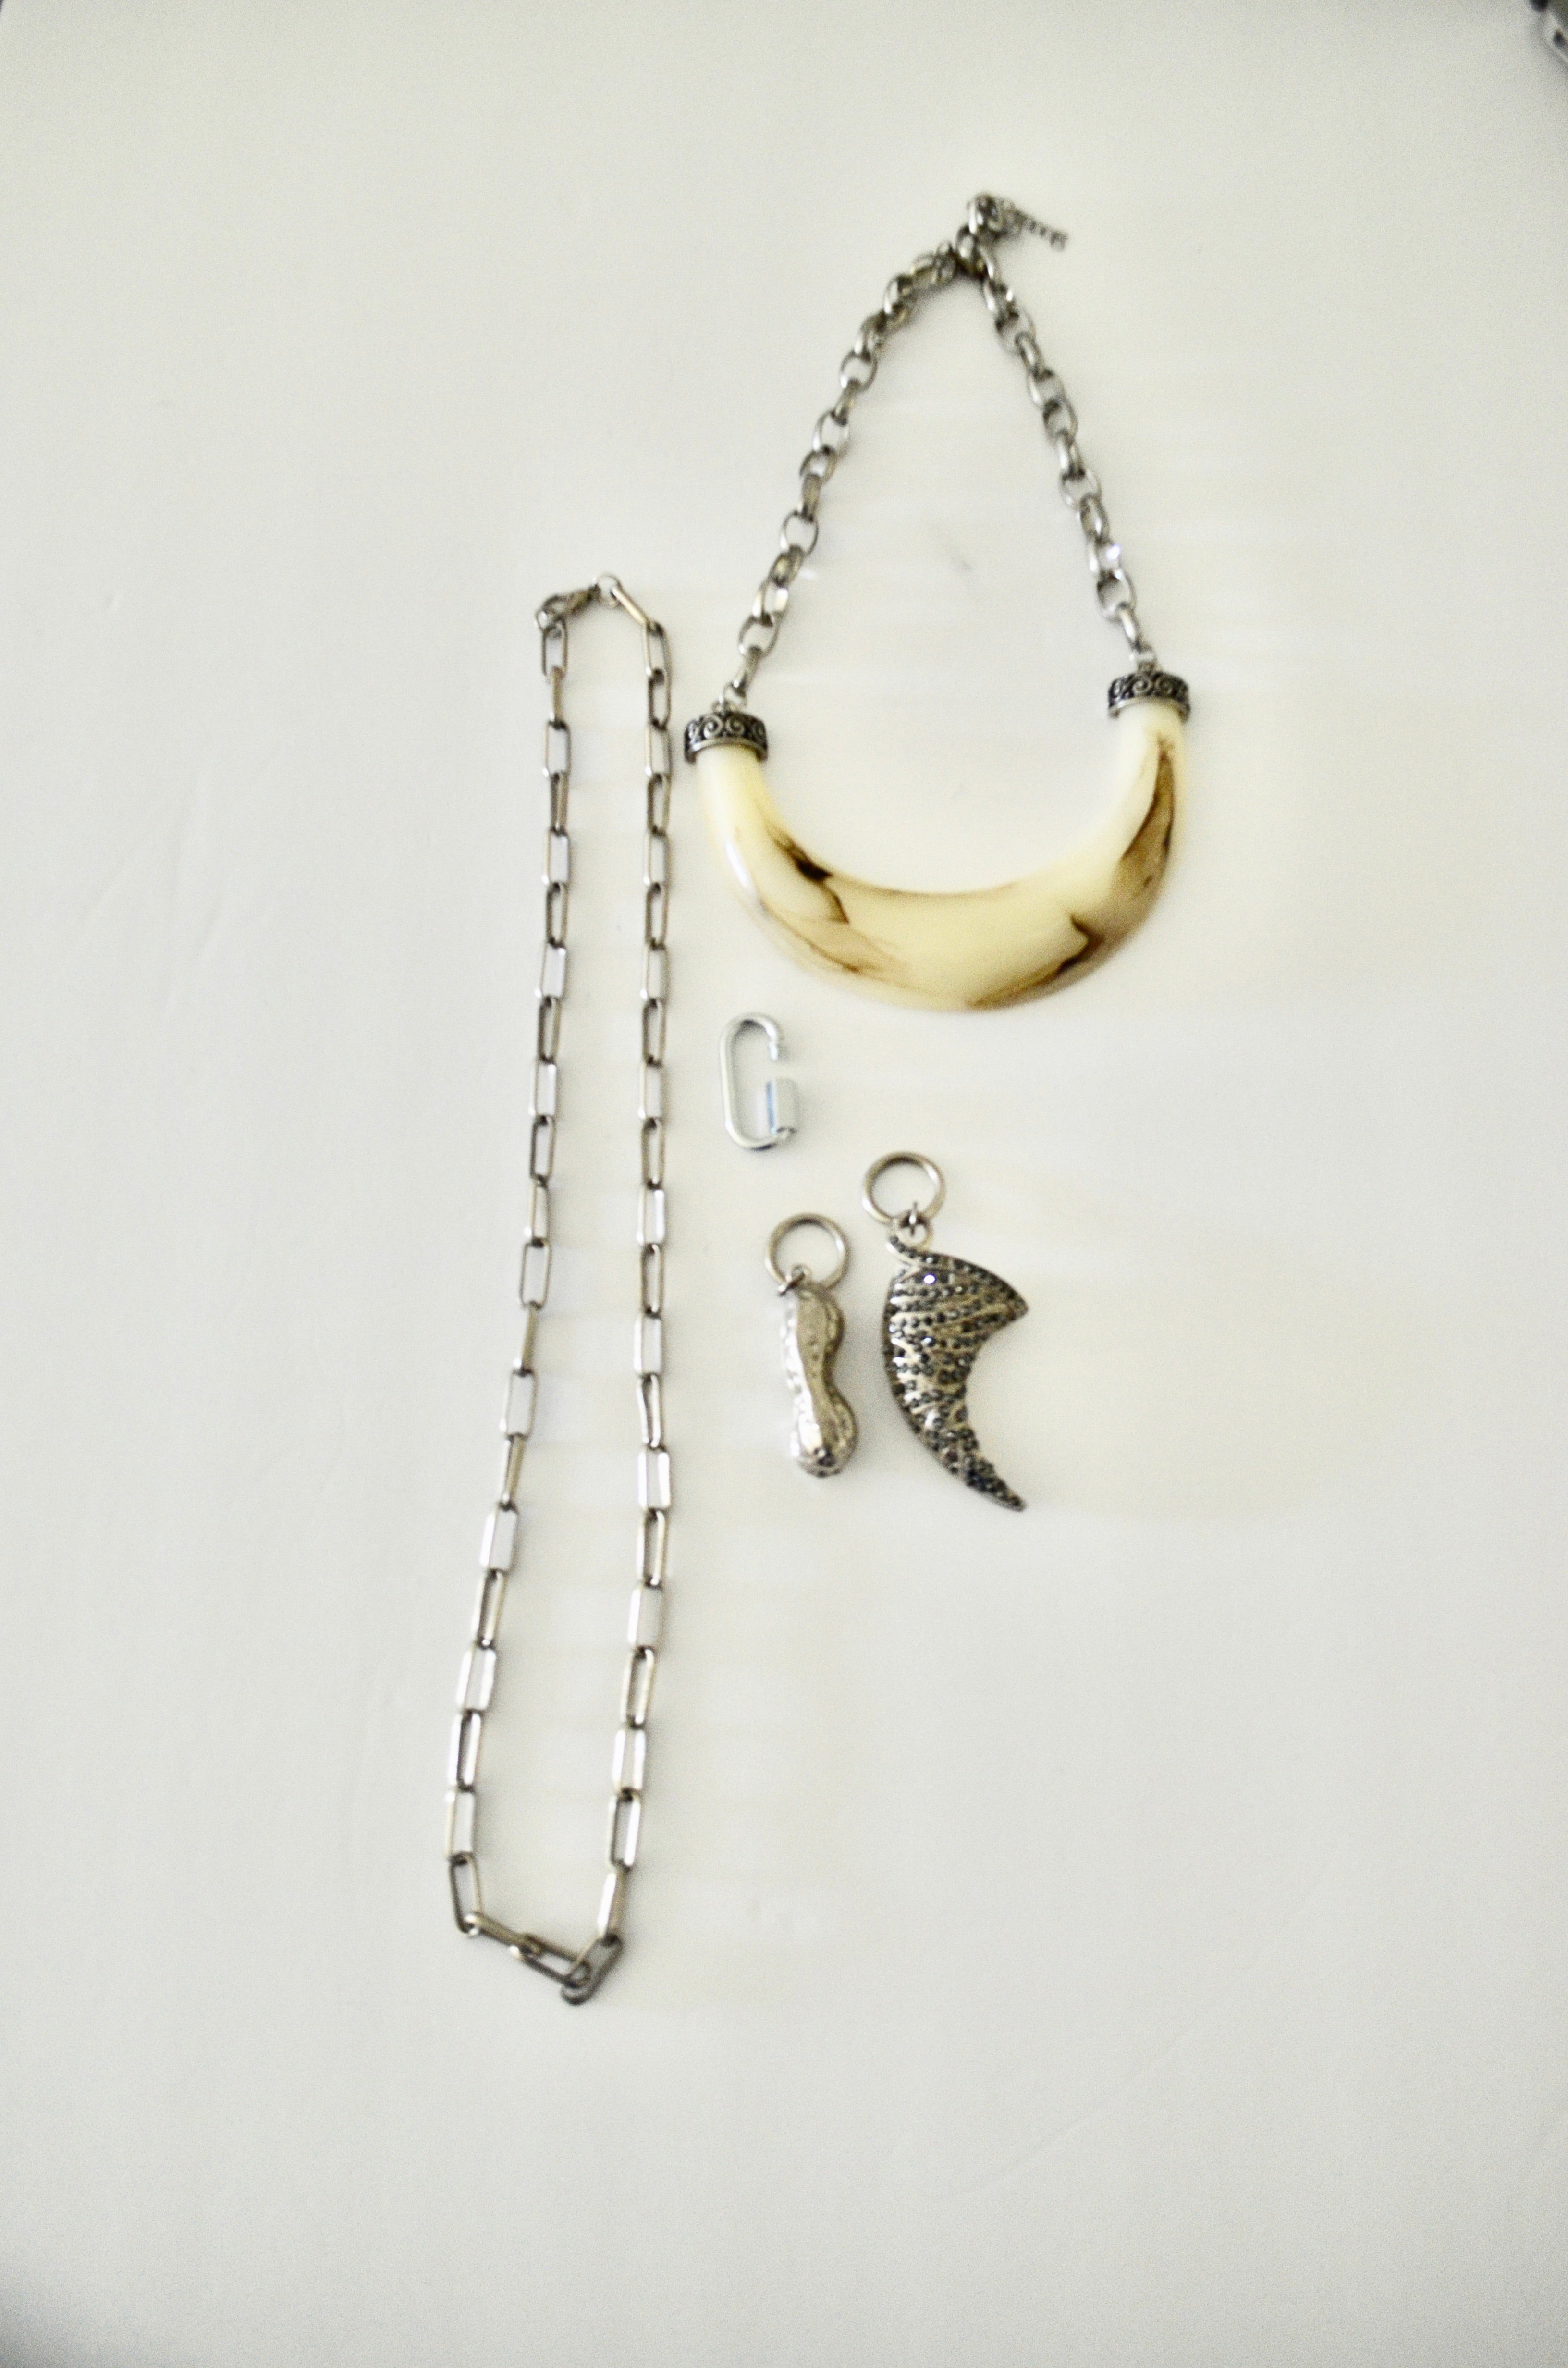 Ethnic Boho Huge Beige Resin Tribal Horn Silver Necklace with Long Link Chain Carabiner Lock Pendant